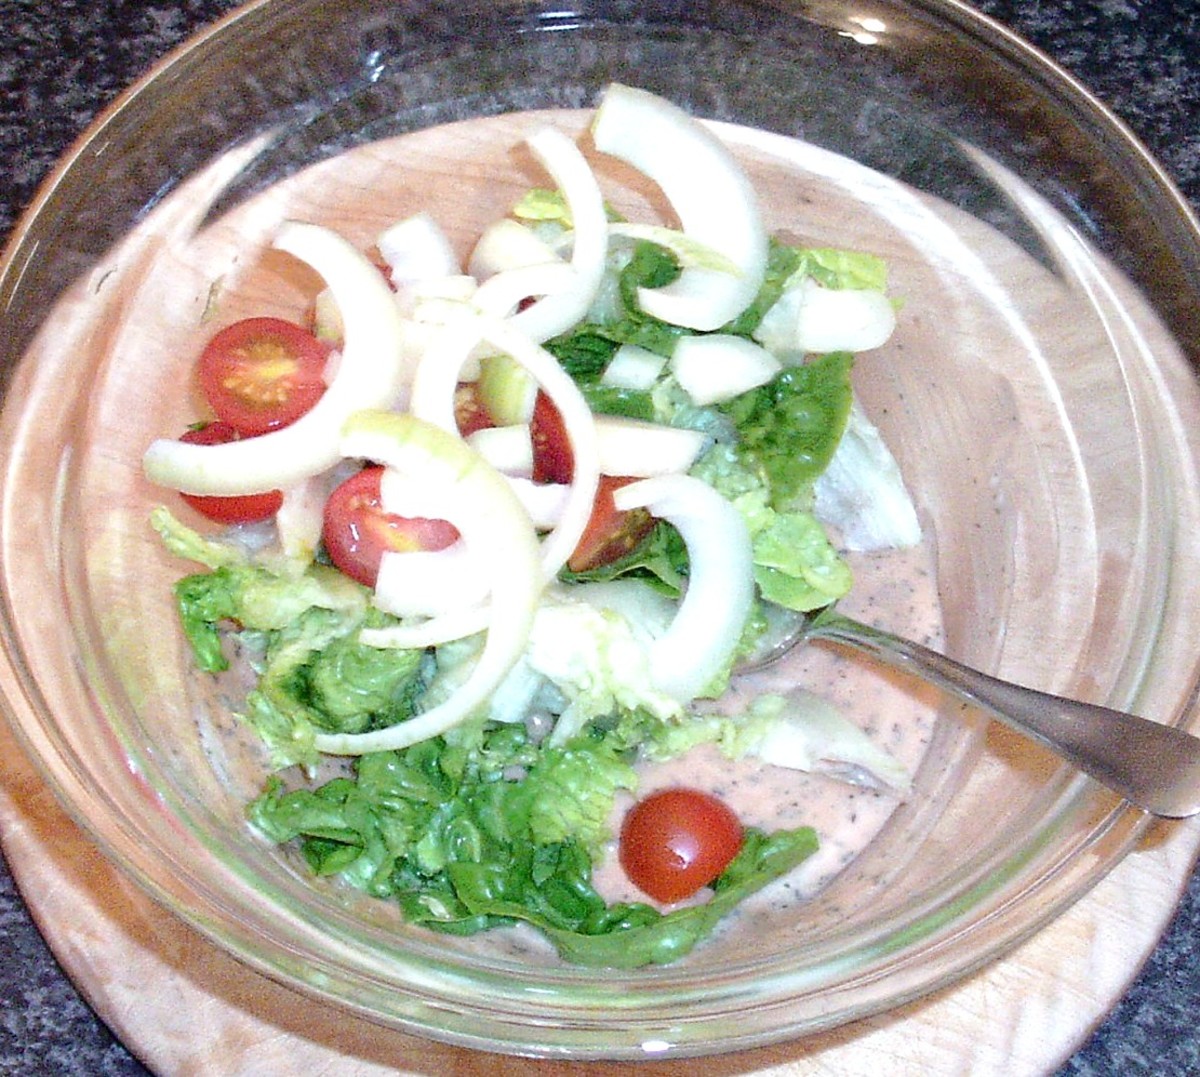 Salad components are added to sauce